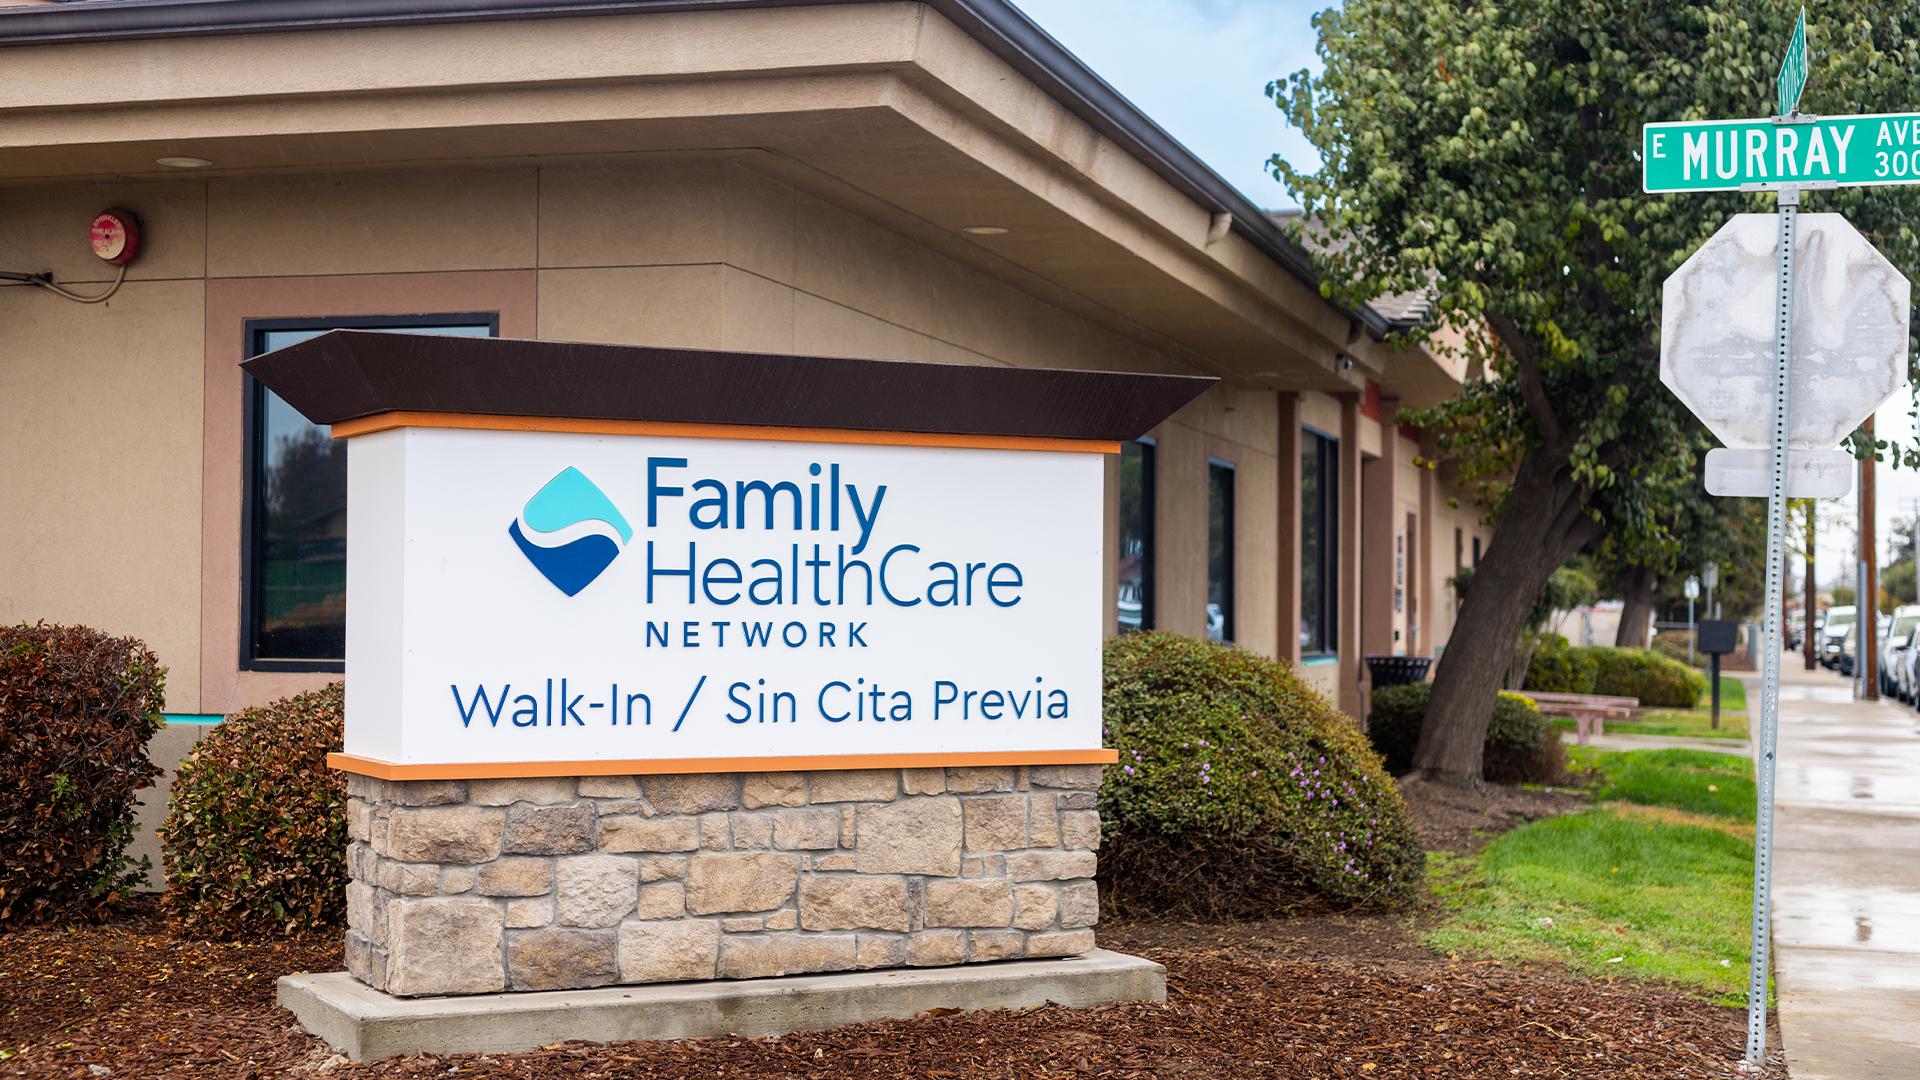 North Putnam Family Healthcare Your Health, Our Priority